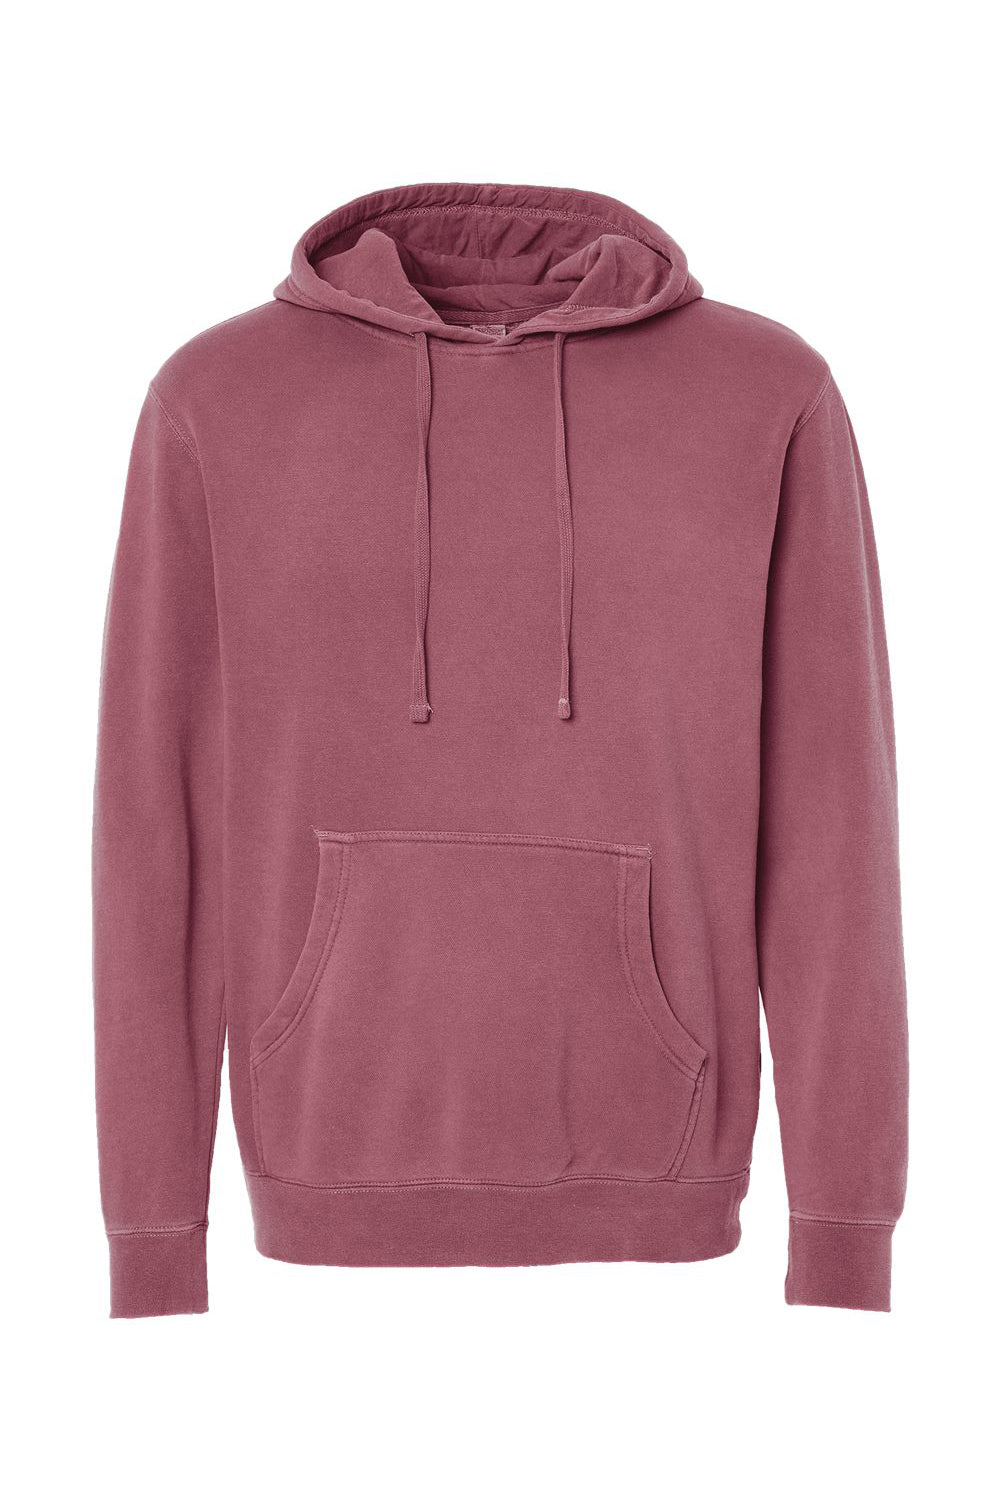 Independent Trading Co. PRM4500 Mens Pigment Dyed Hooded Sweatshirt Hoodie Maroon Flat Front